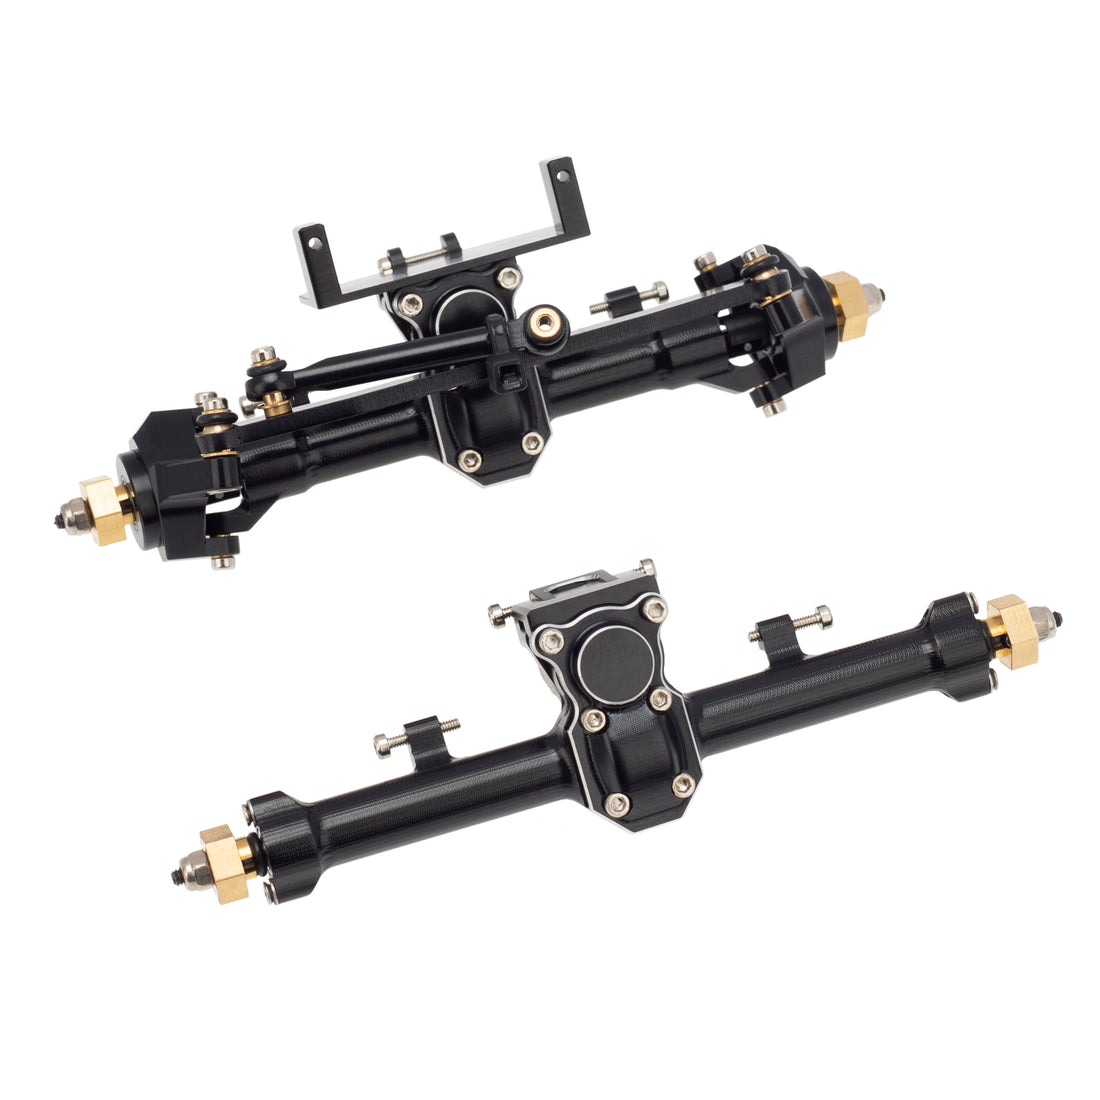 CNC Aluminum Front and Rear Axle for Axial SCX24